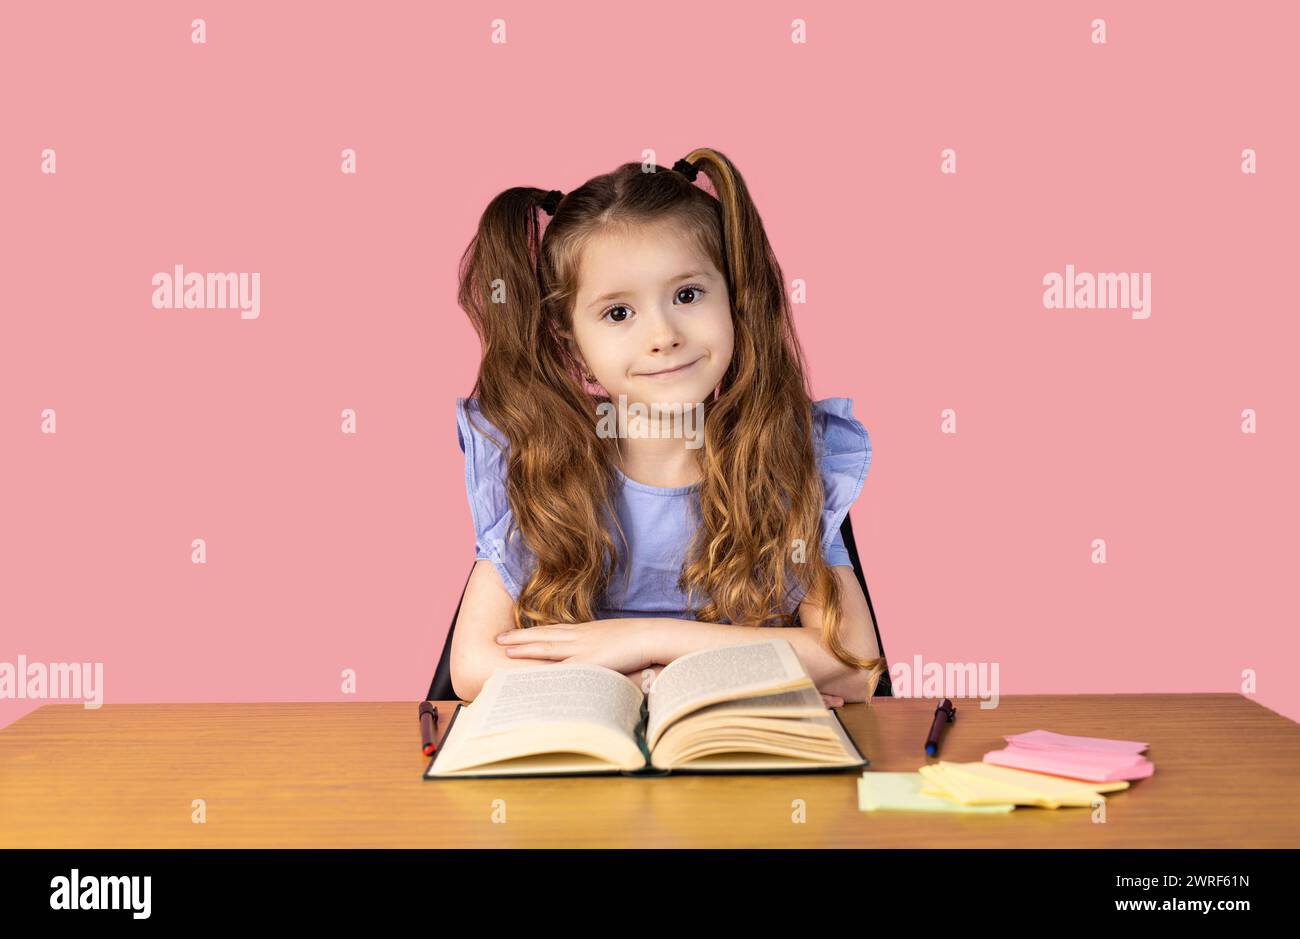 Clever and tidy little girl with two ponytails holds her hands on the bench and looks smiling at the camera isolated on a pink background. Concept of Stock Photo